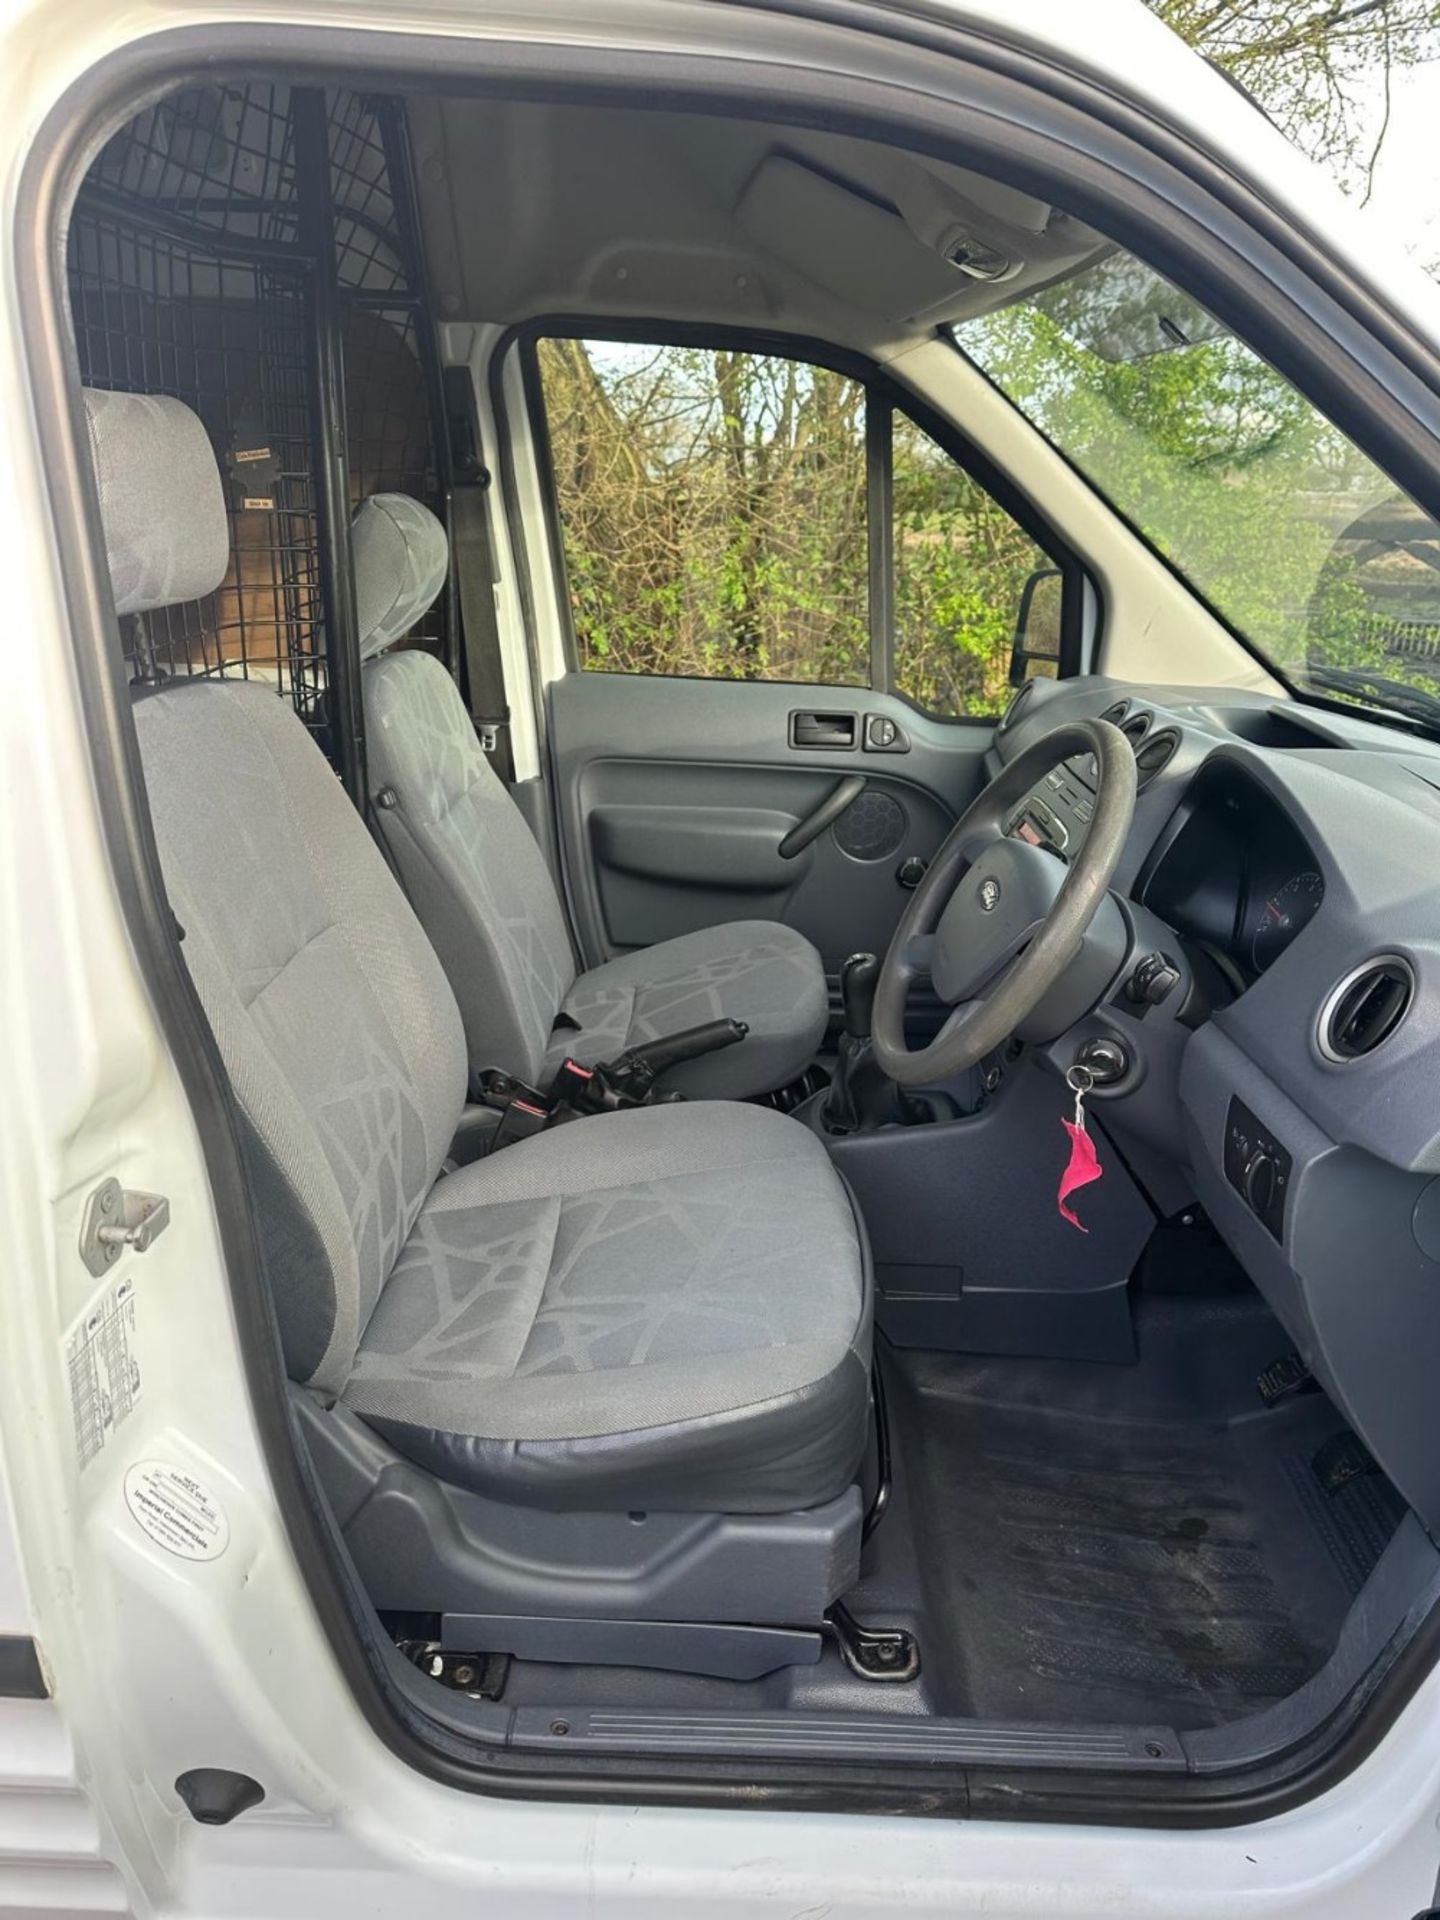 FORD TRANSIT CONNECT PANEL VAN REG:BV13 NKS 1.8LITRE. HIGH ROOF LWB. 83K REC MILES APPROX. WITH V5 A - Image 11 of 26